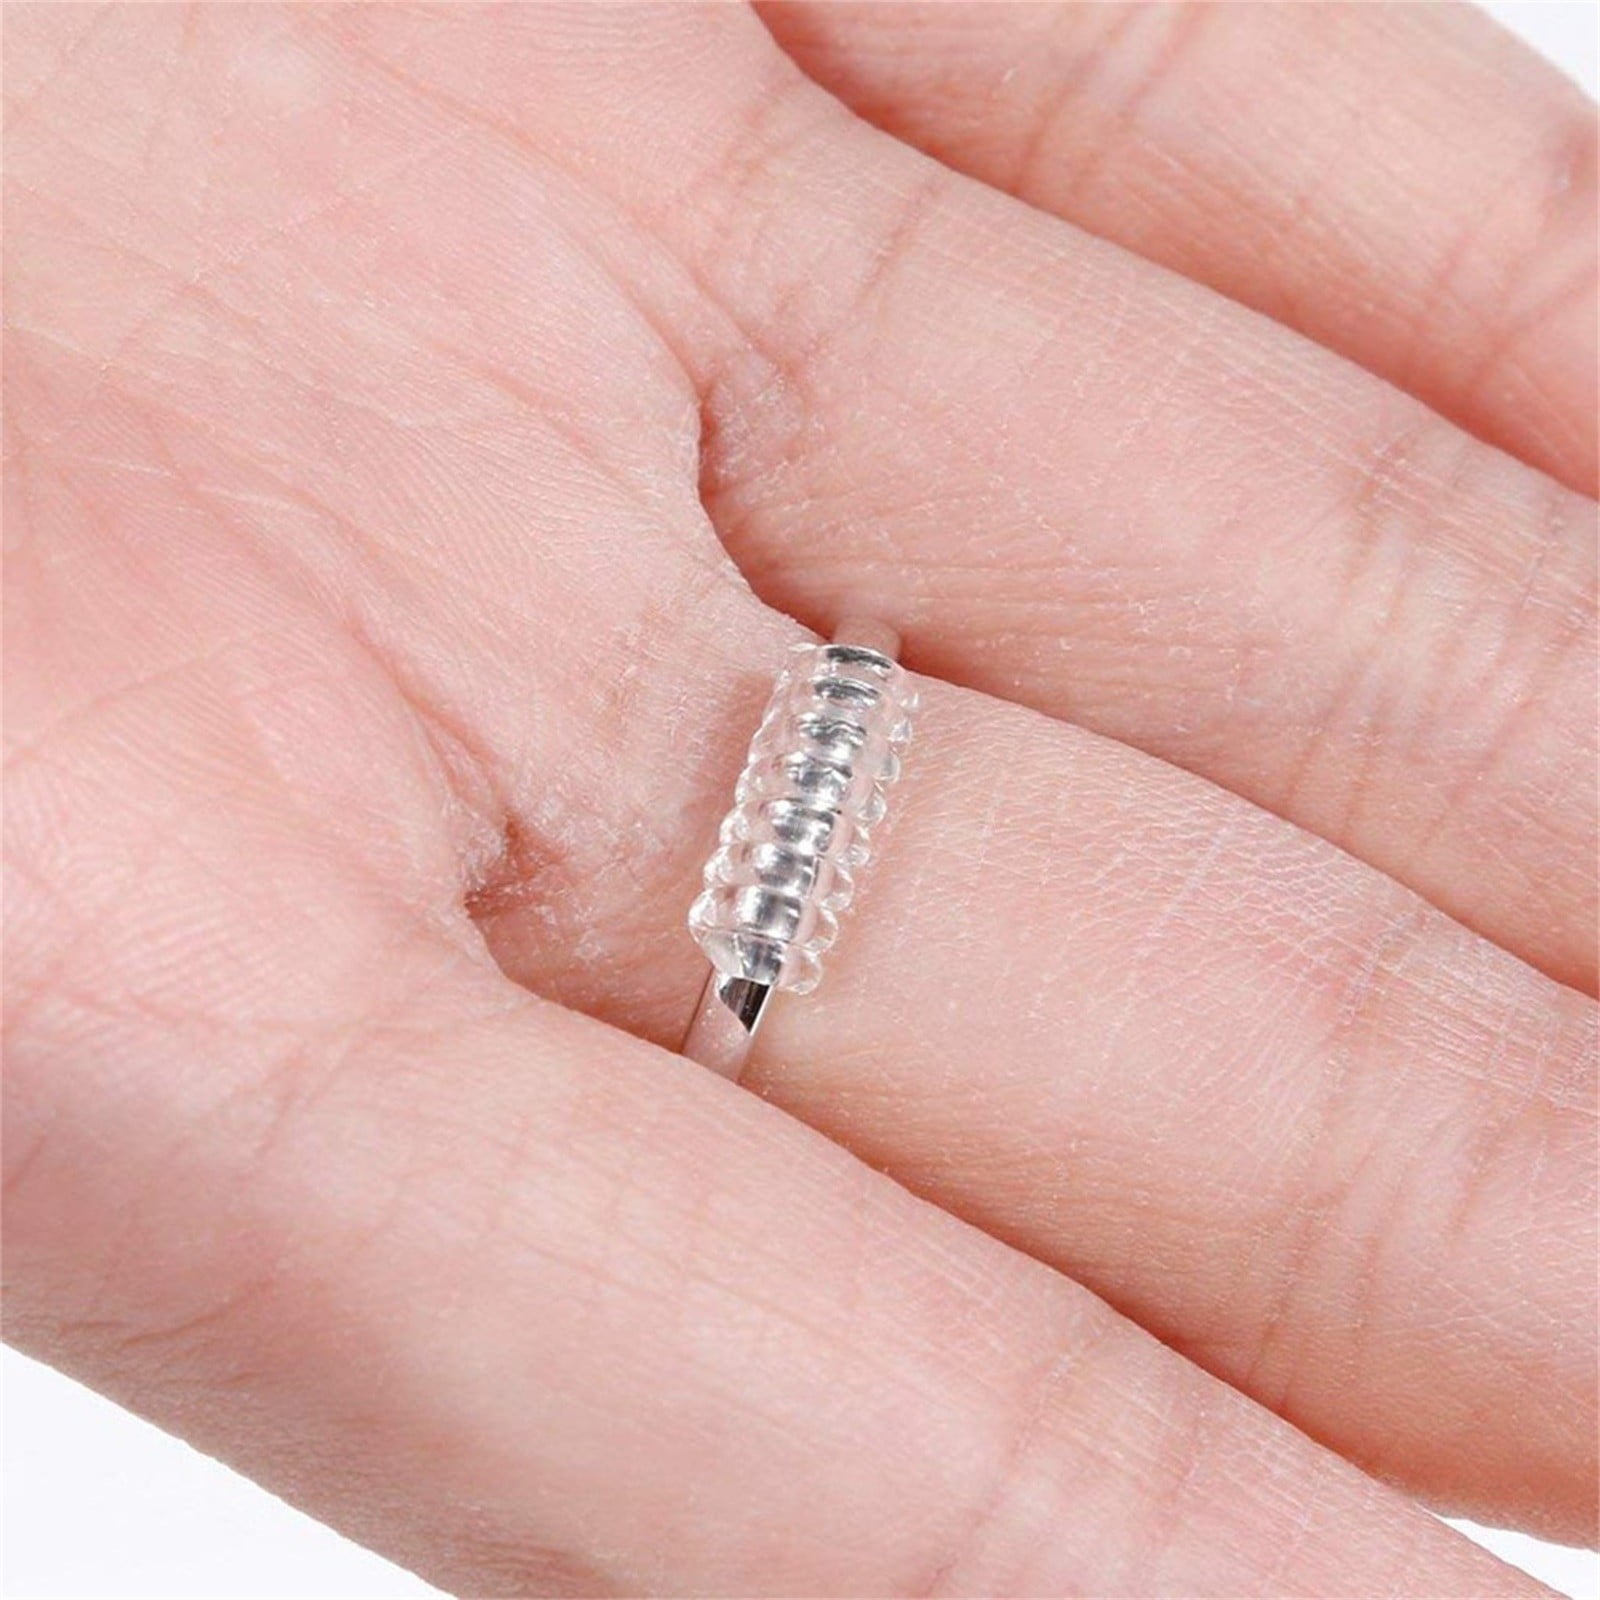 16Pieces Transparent Resizer Reducer Guard to Make Jewelry Smaller